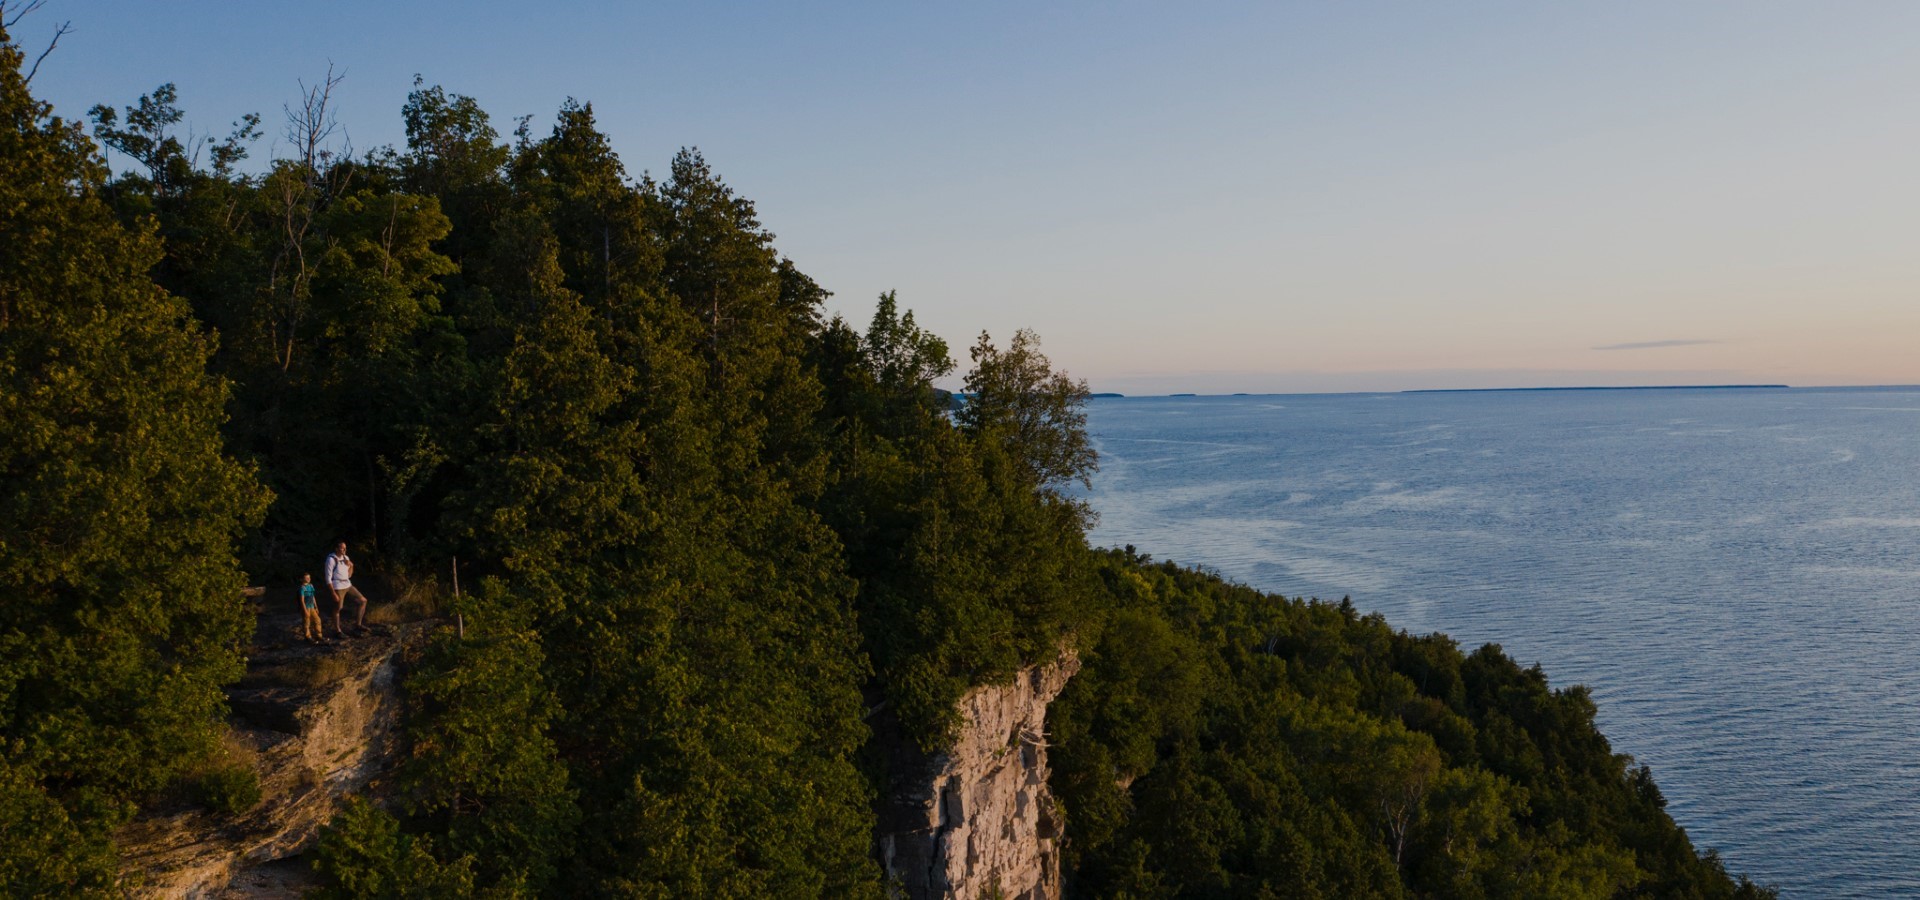 Trees along a cliff line with the lake in the distance.